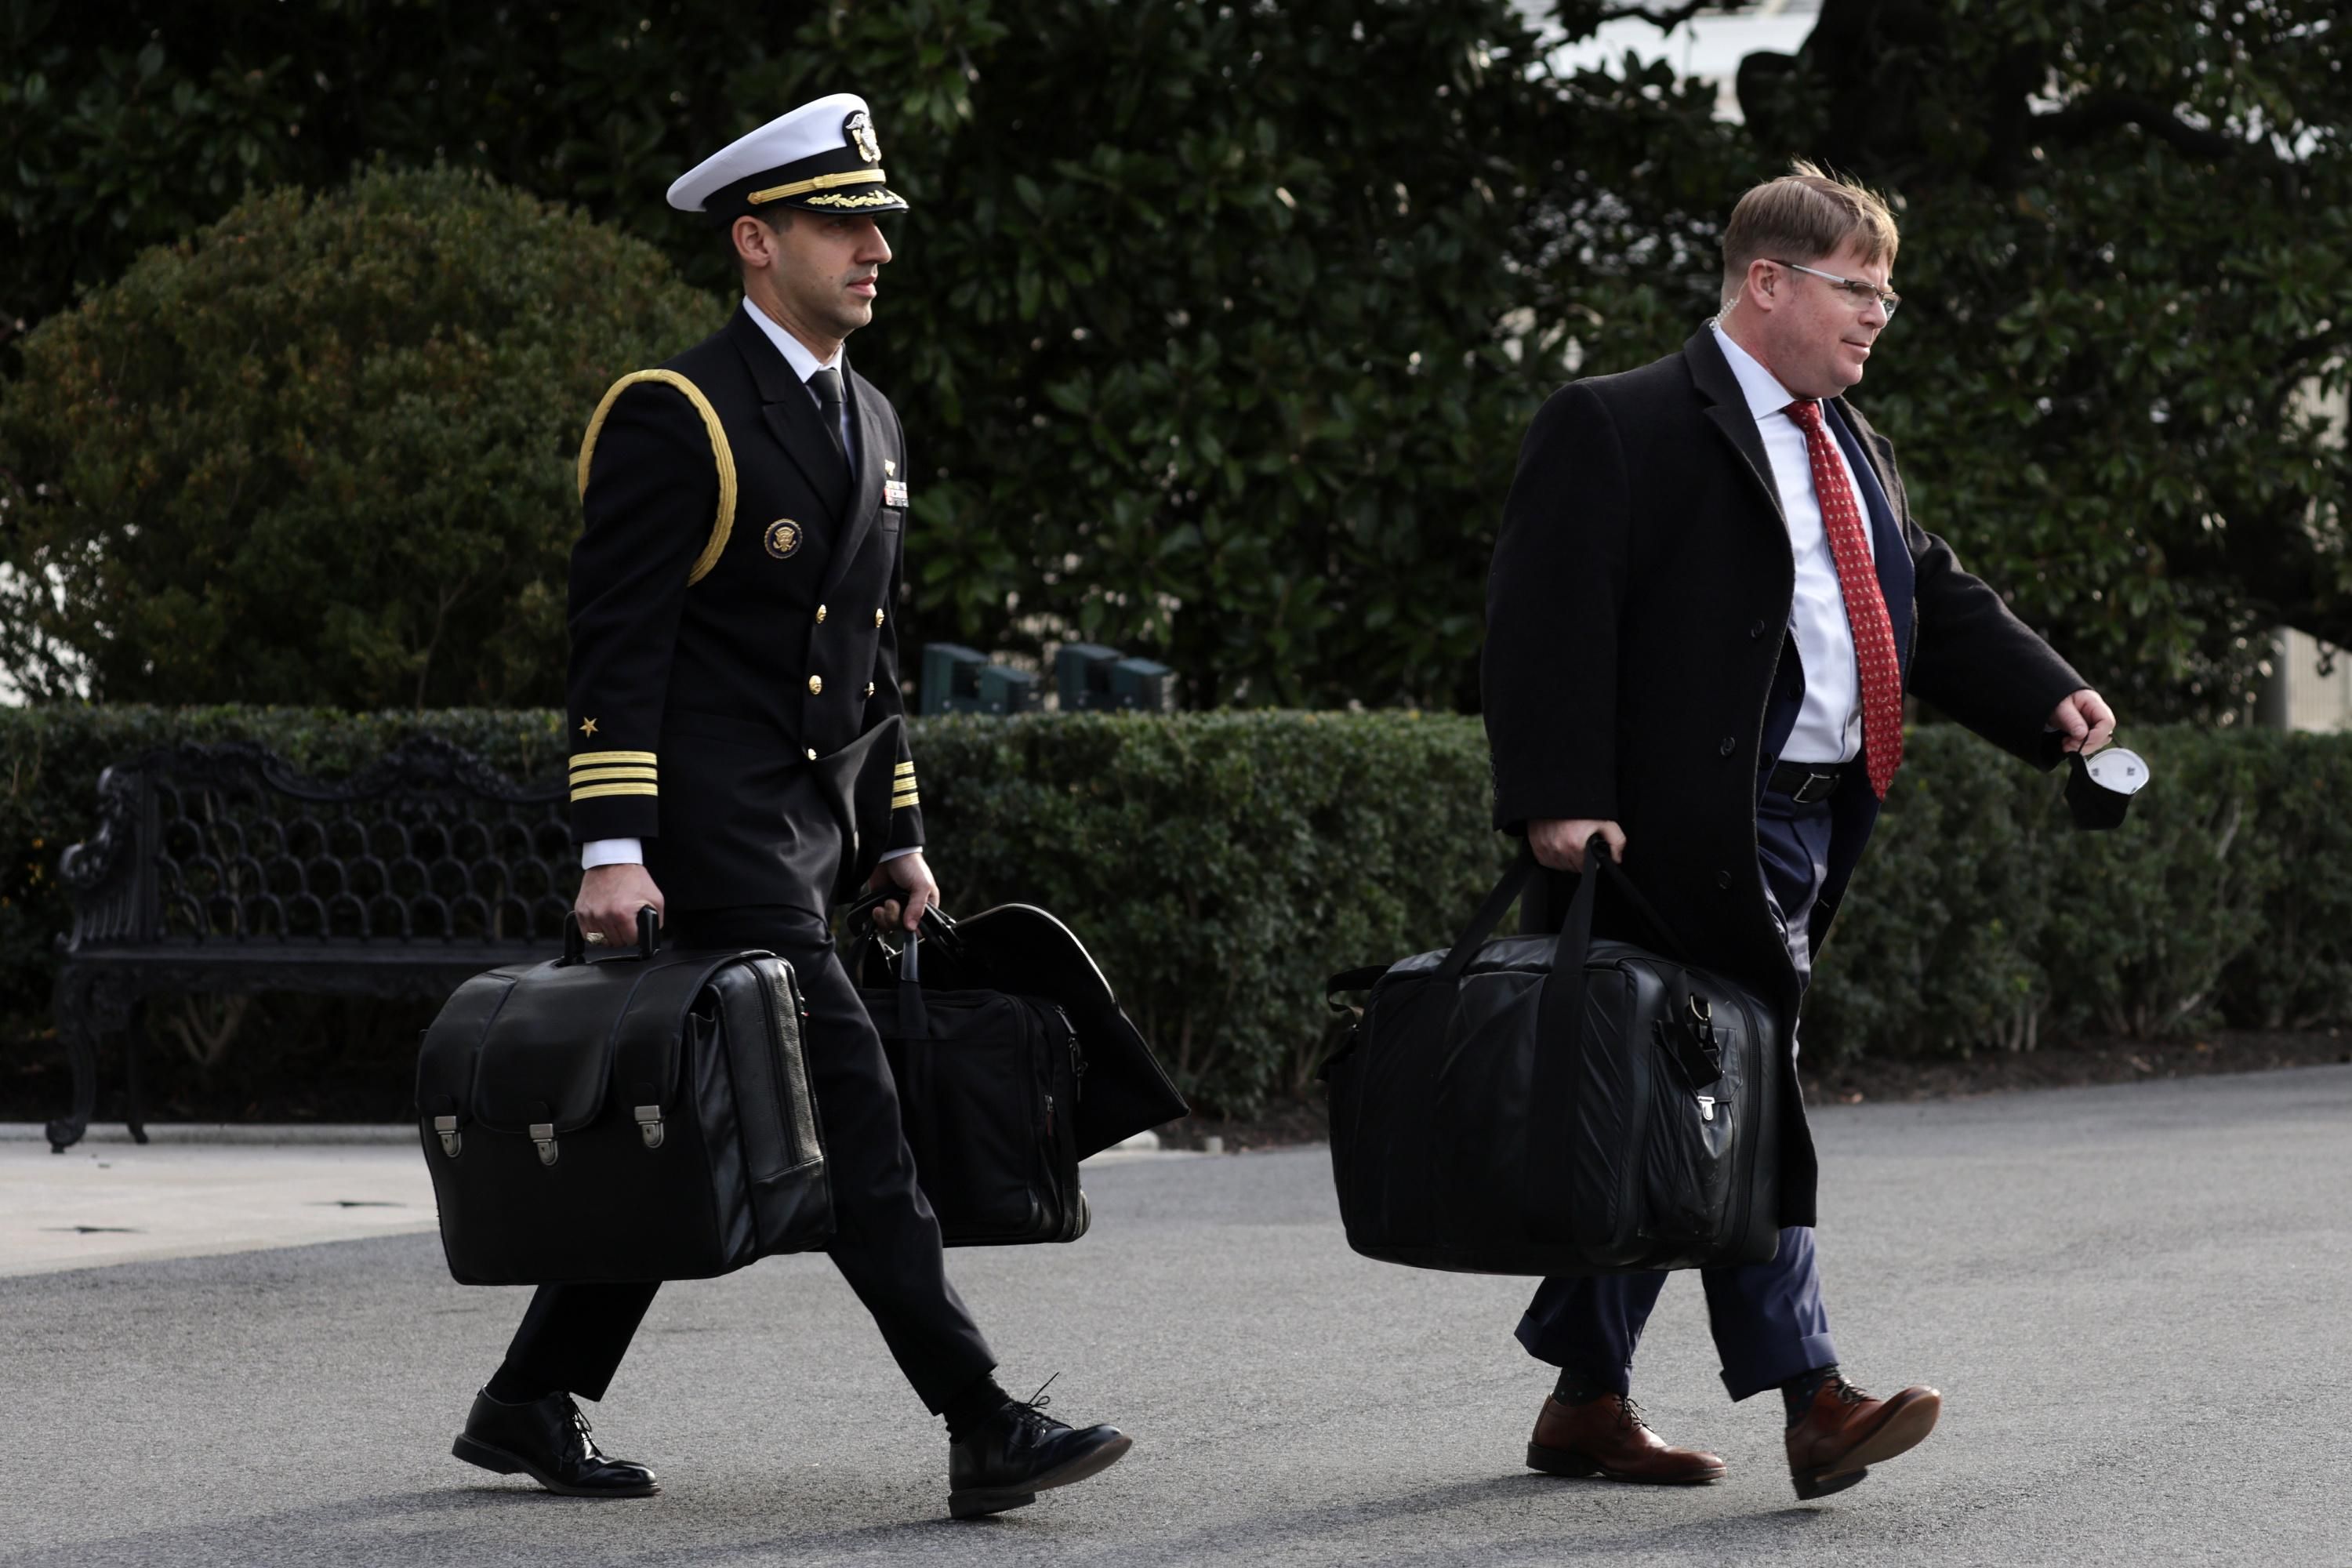 A military aide carries the so-called "nuclear football"